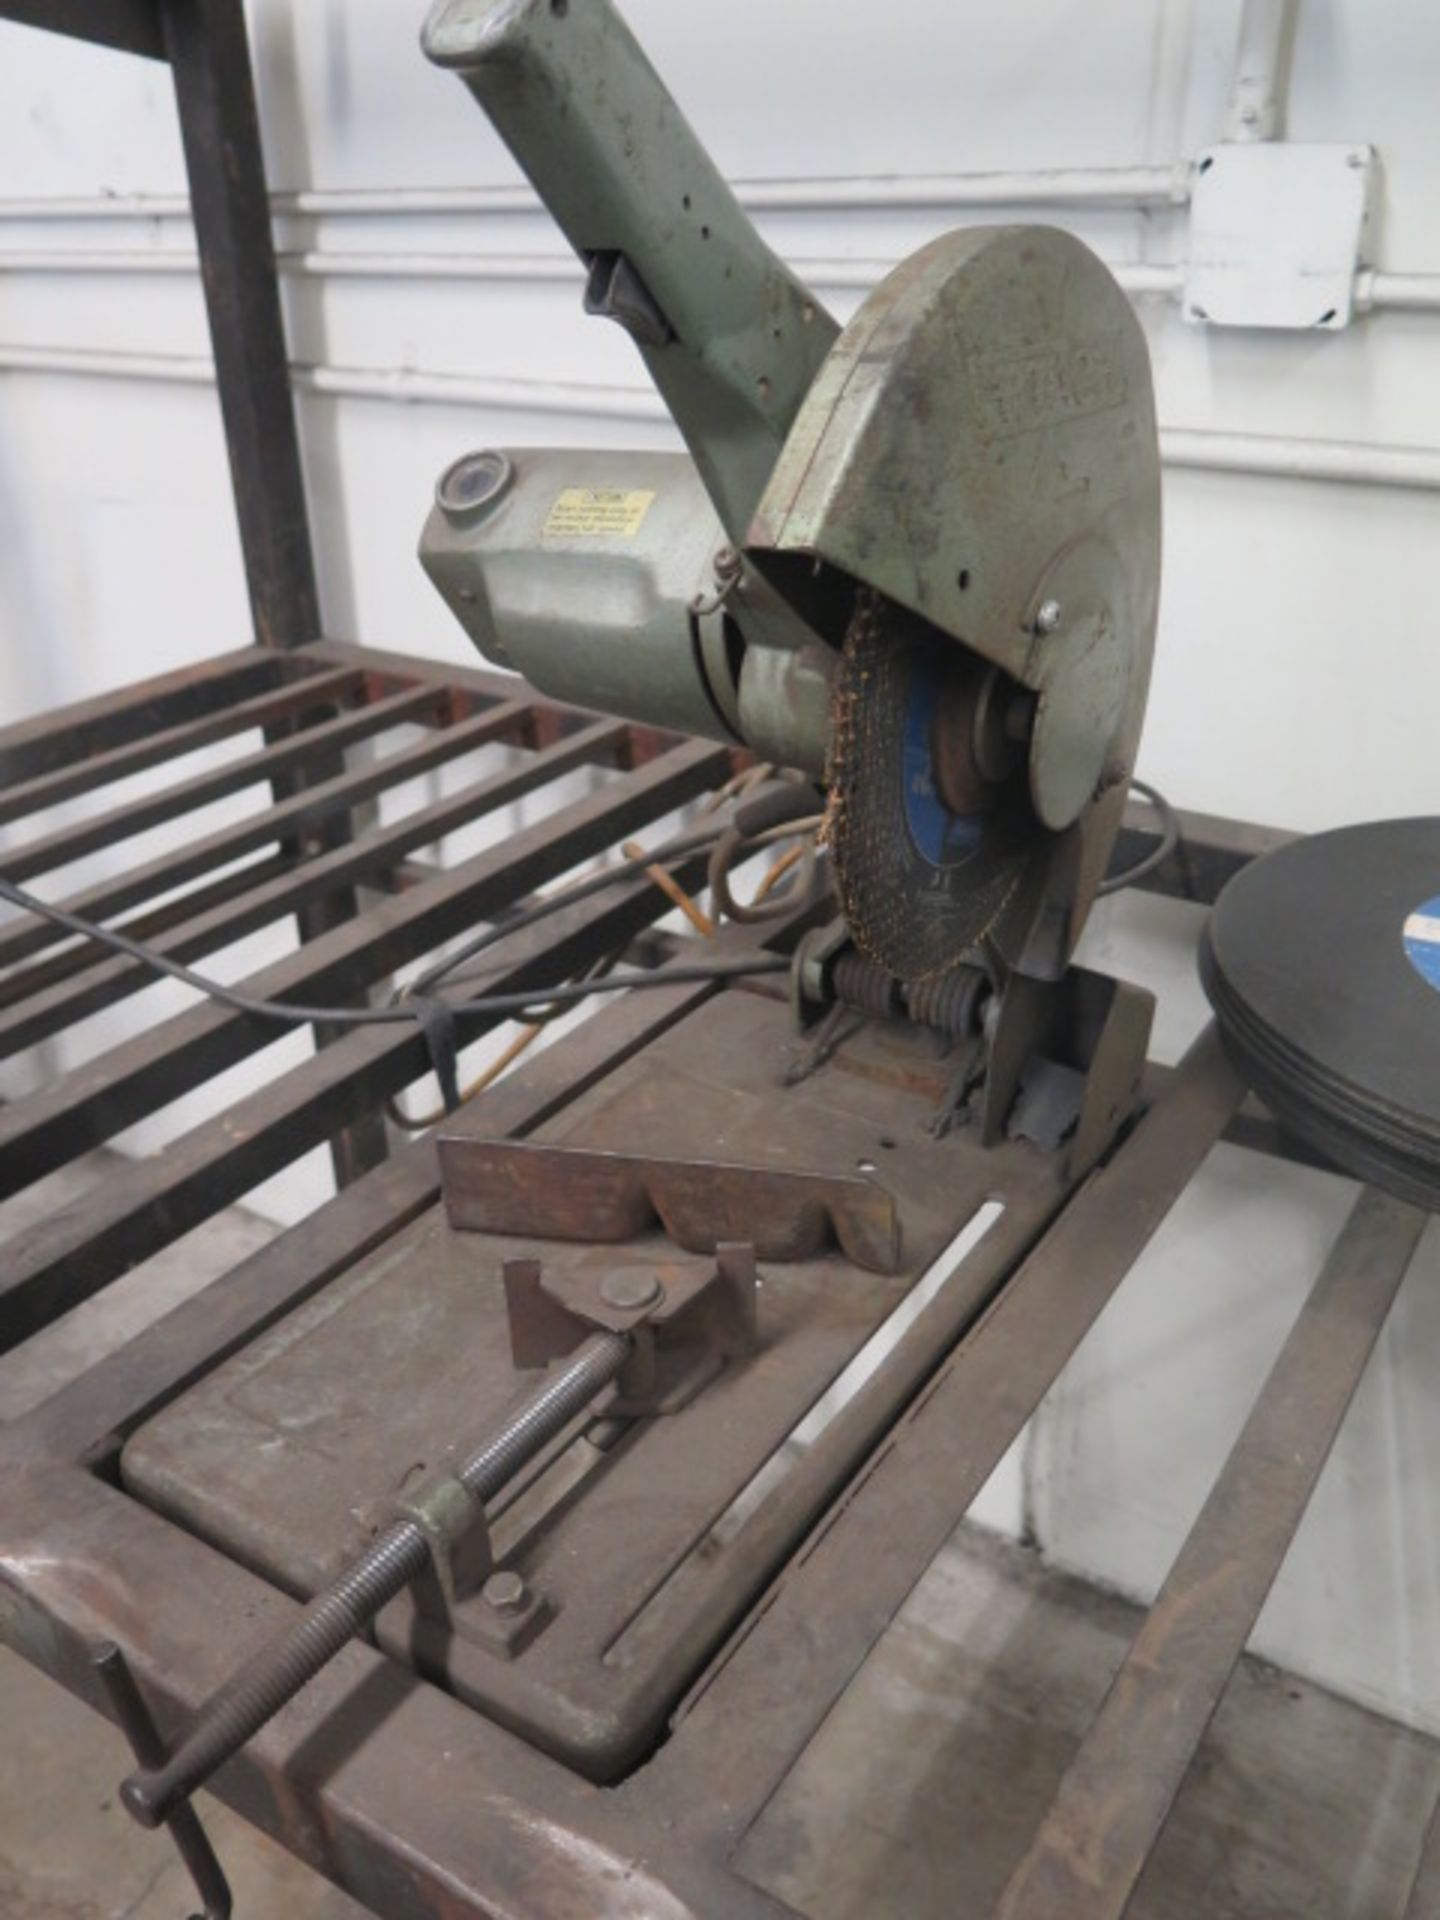 12" Abrasive Cutoff Saw w/ Steel Bench and Bench Grinder - Image 2 of 4